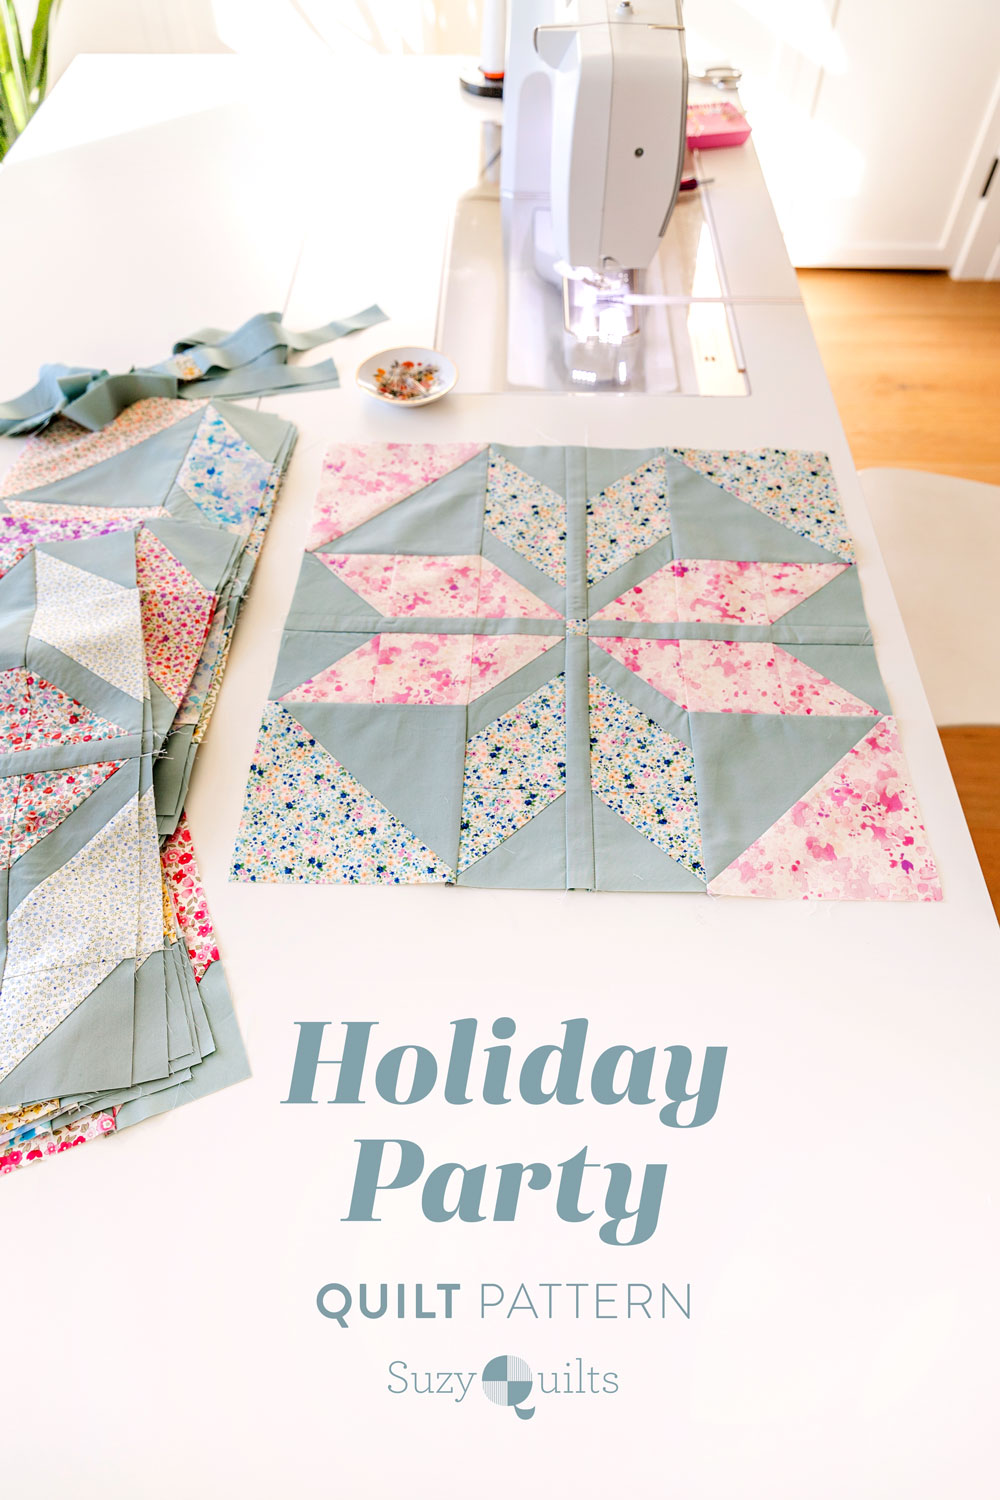 In Weeks 4 and 5 of the Holiday Party sew along we assemble our quilt blocks. Check out these extra tips and troubleshooting help! suzyquilts.com #sewalong #quilt